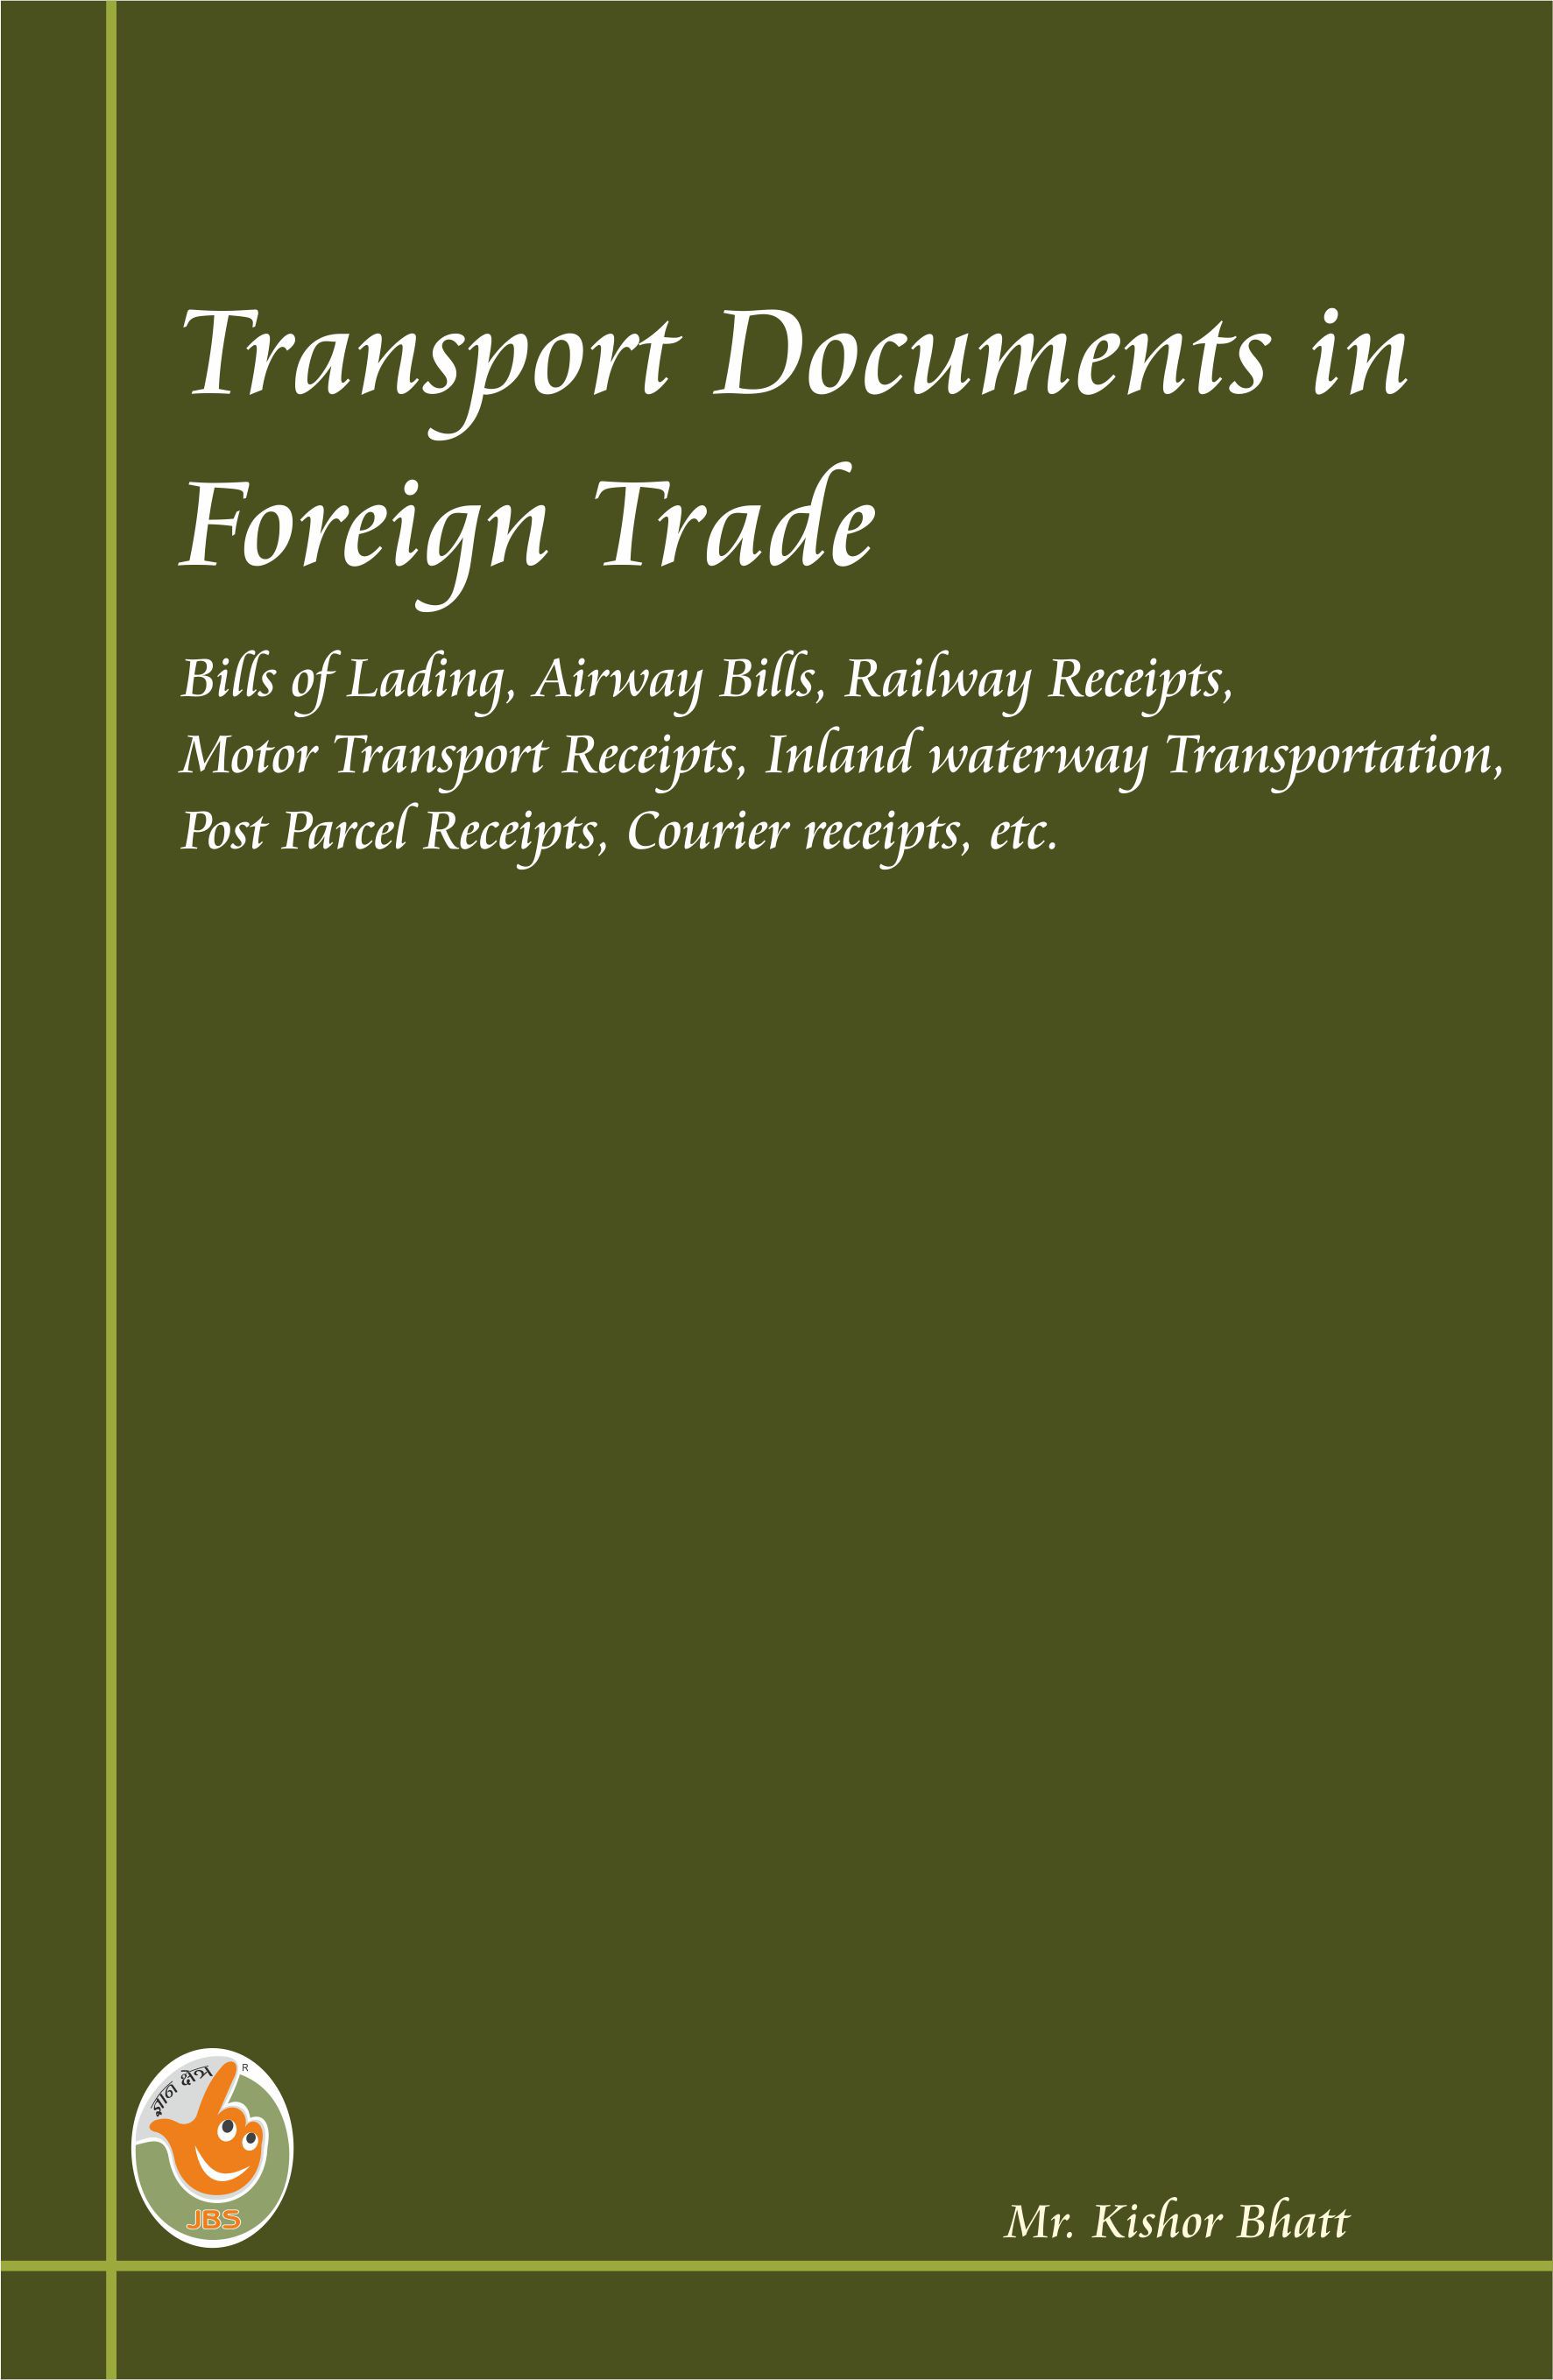 Transport Documents in Foreign Trade